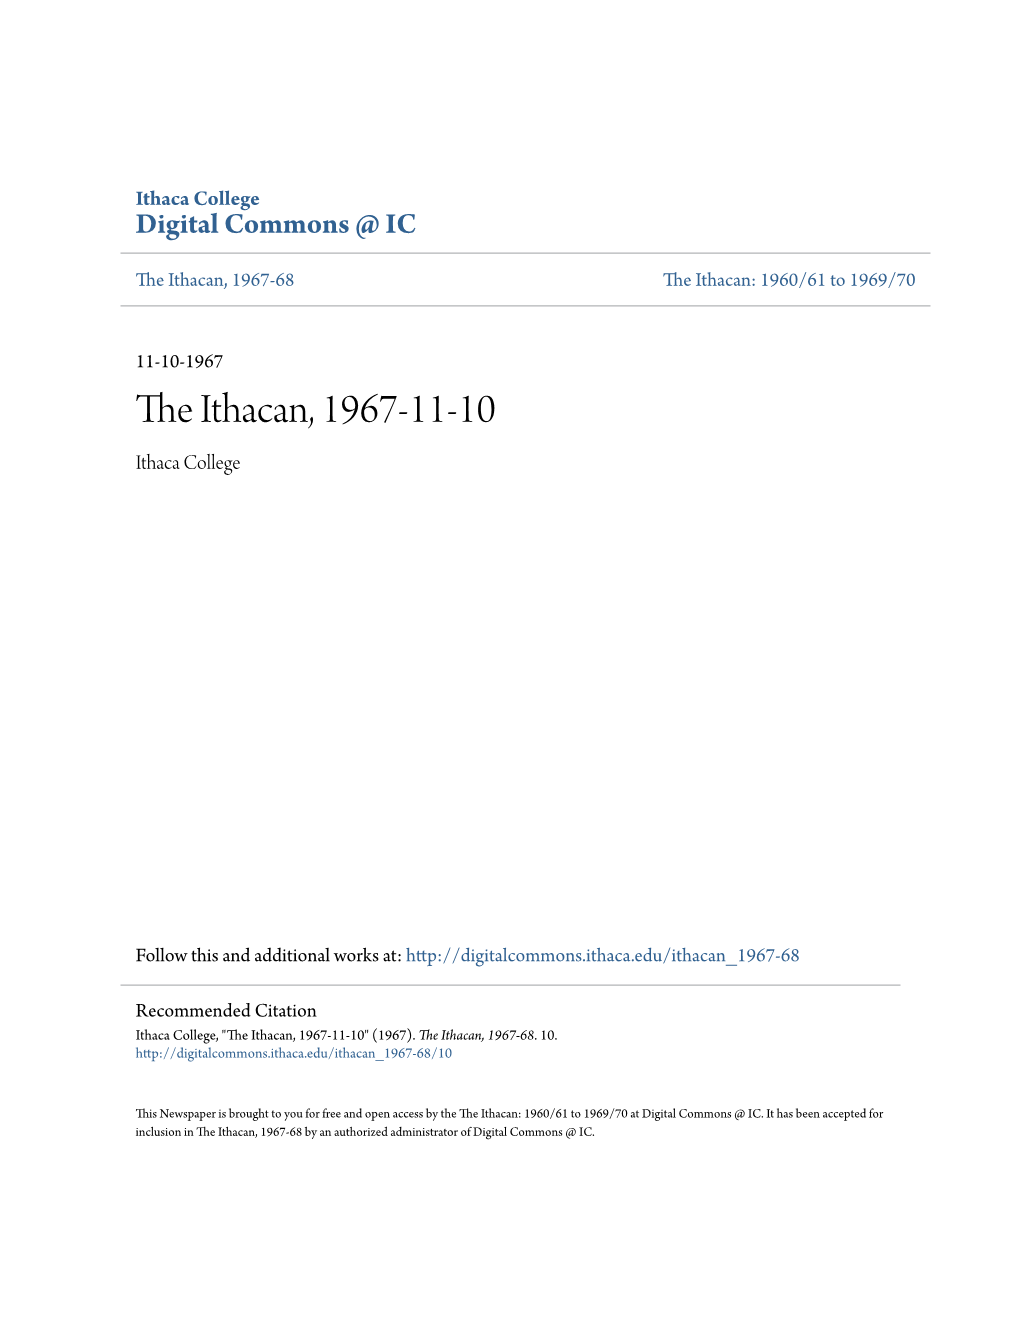 The Ithacan, 1967-11-10